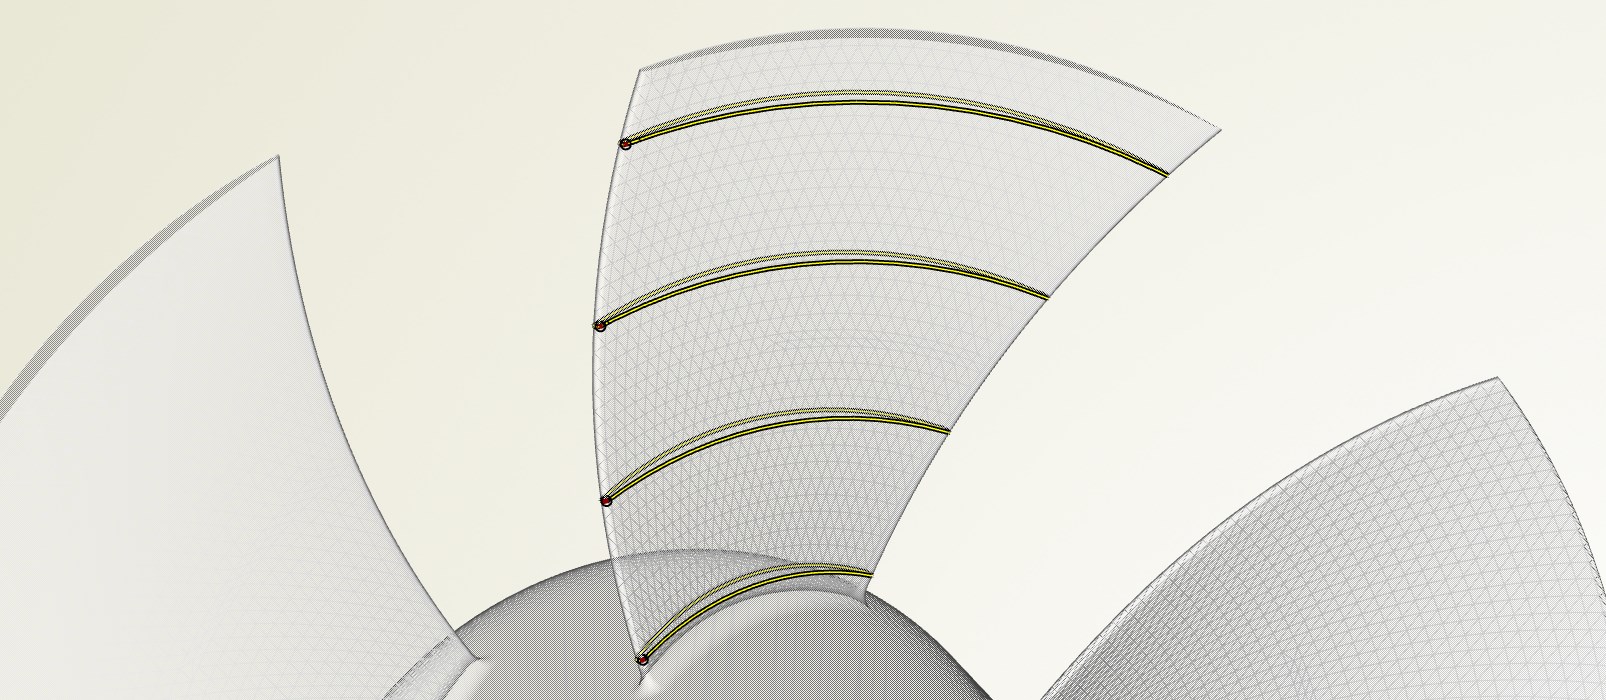 caeses blade sections axial fan